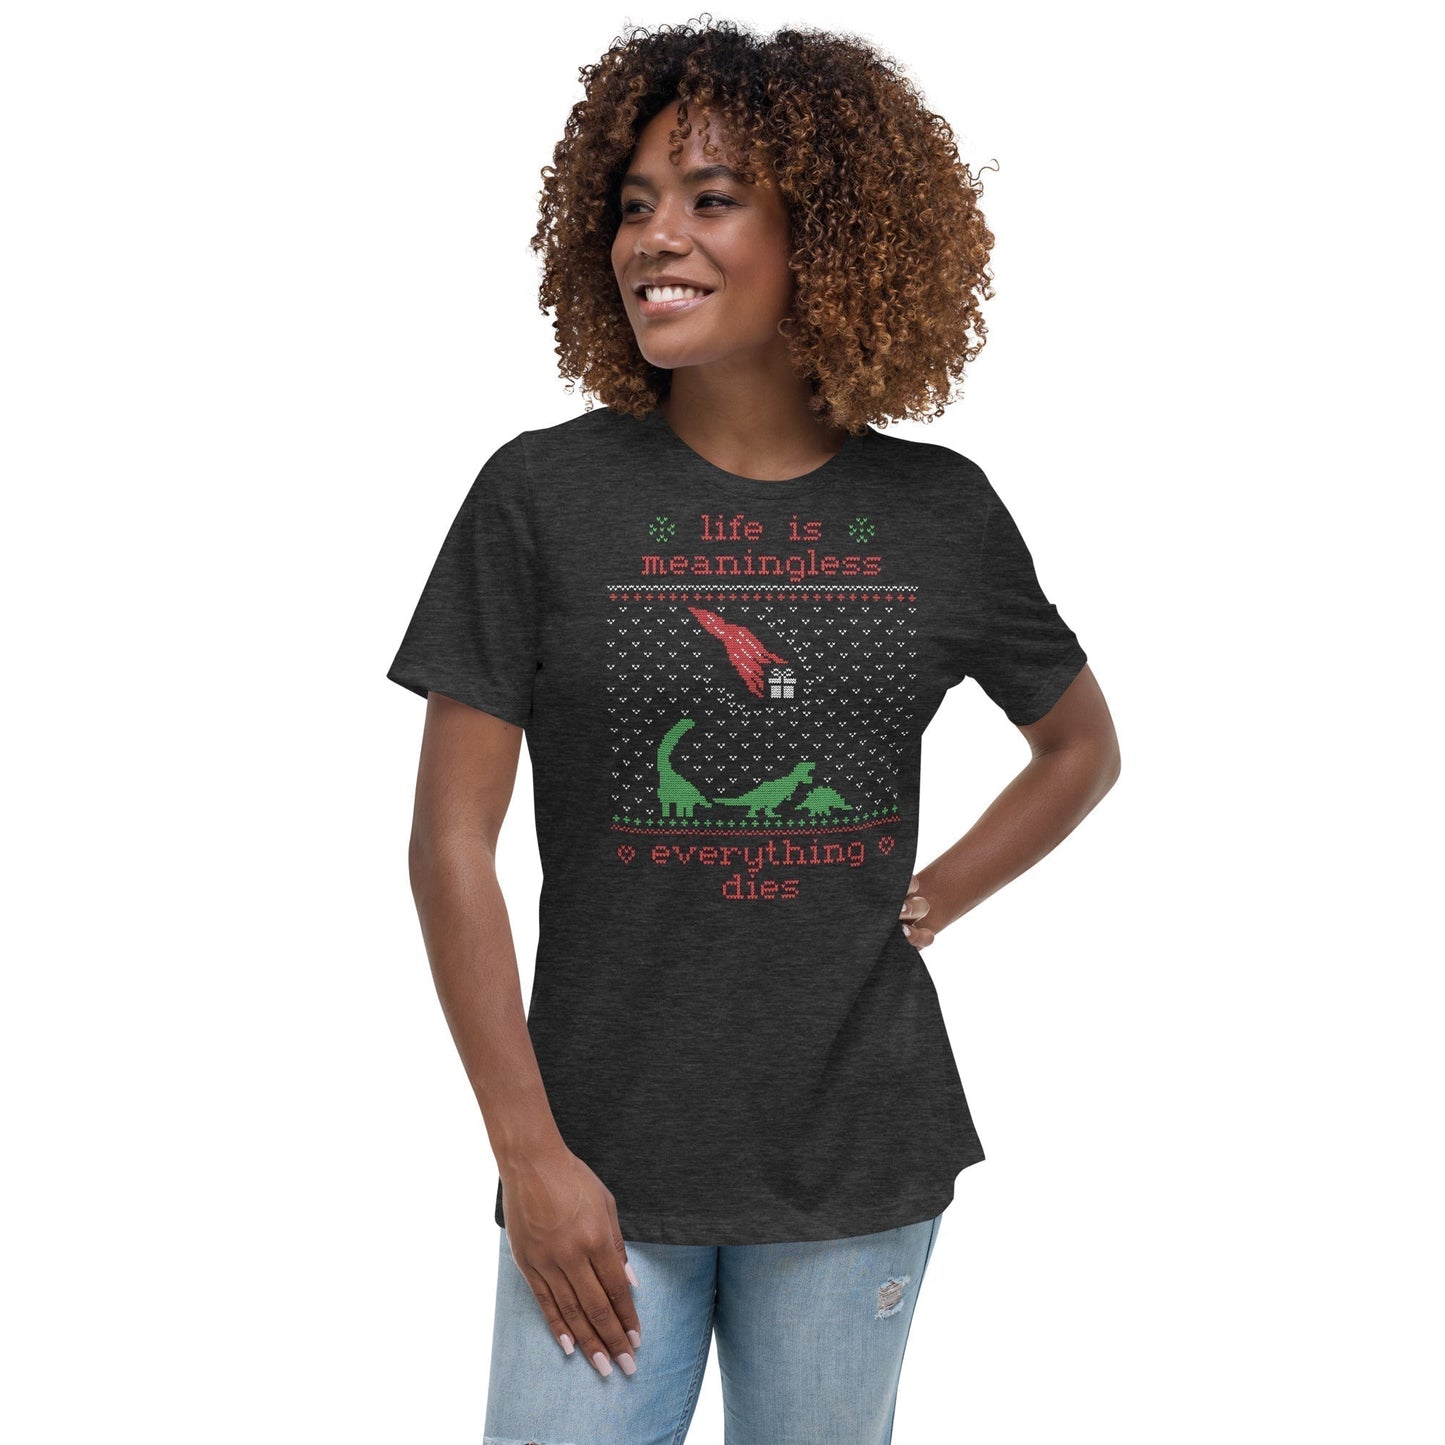 Life is meaningless - Ugly Xmas Sweater - Women's T-Shirt